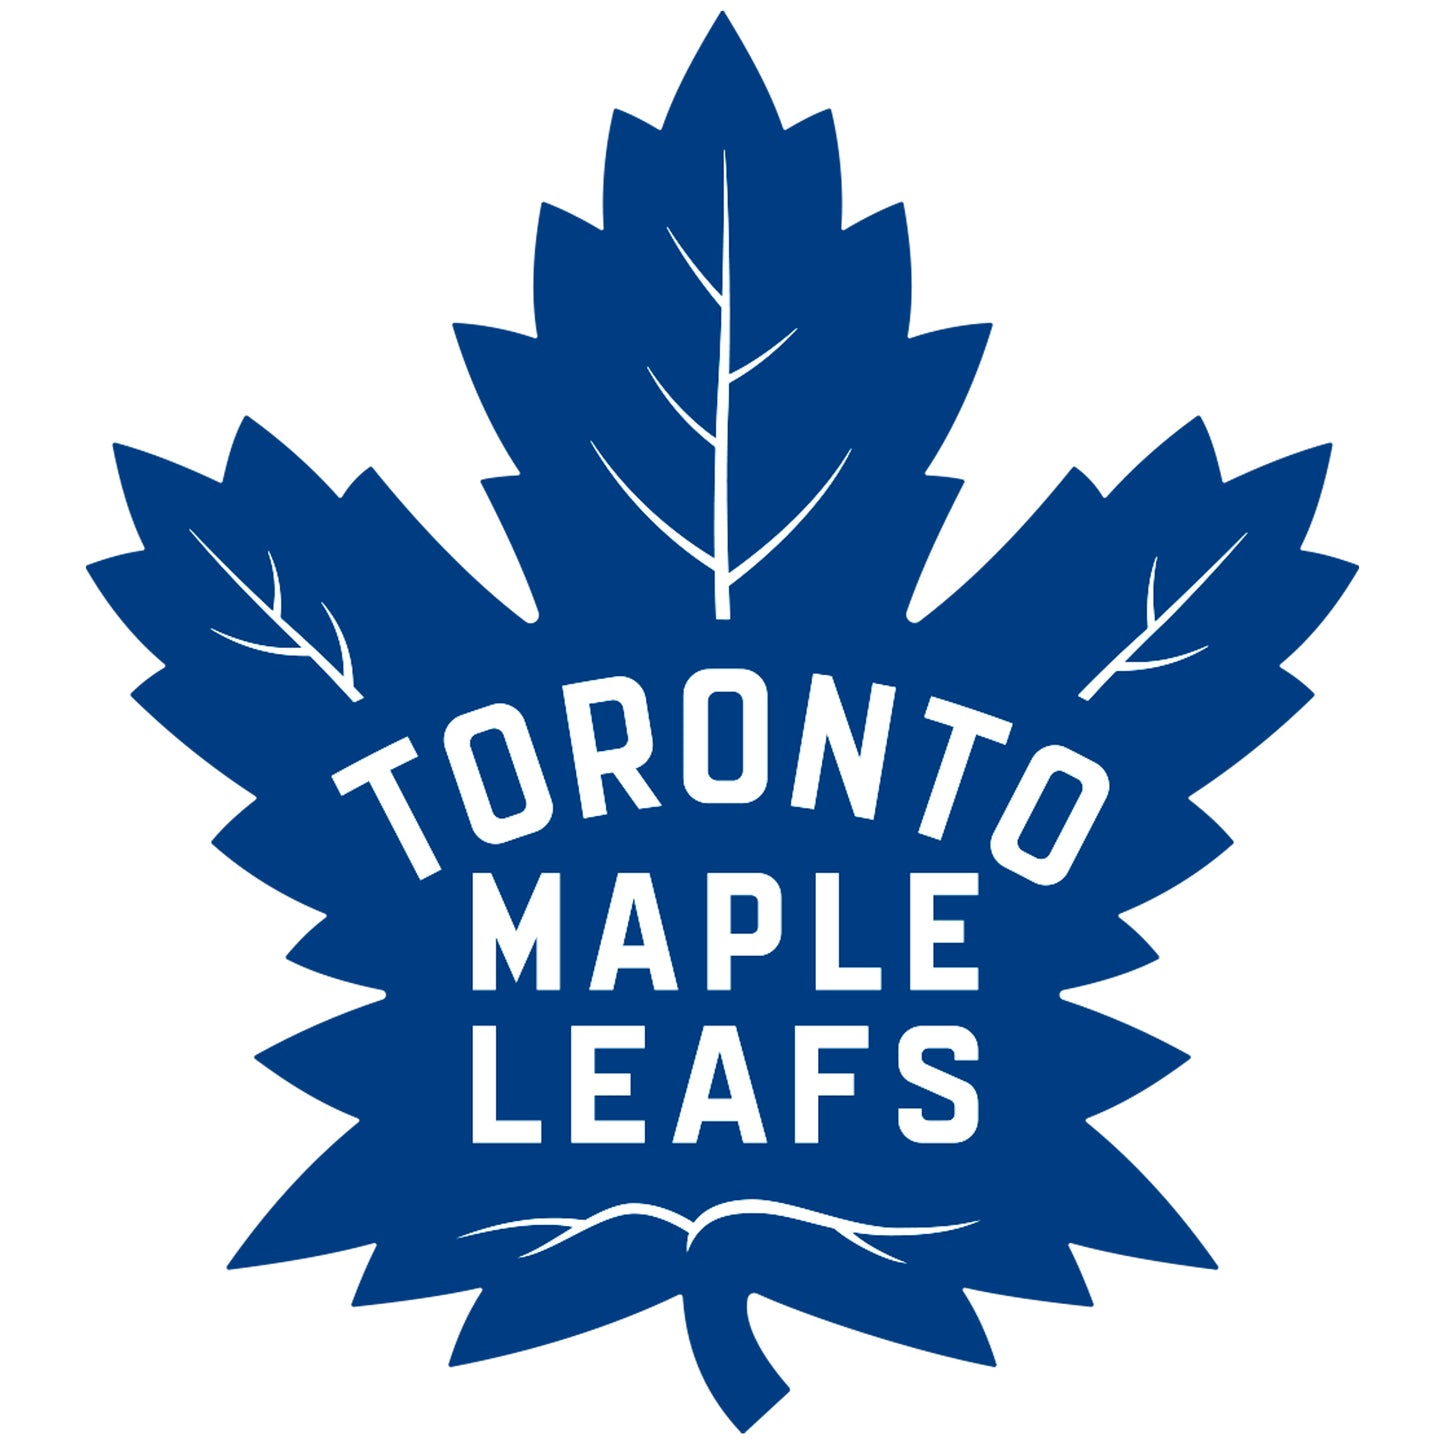 Sheet of 5 -Toronto Maple Leafs:   Logo Minis        - Officially Licensed NHL Removable    Adhesive Decal